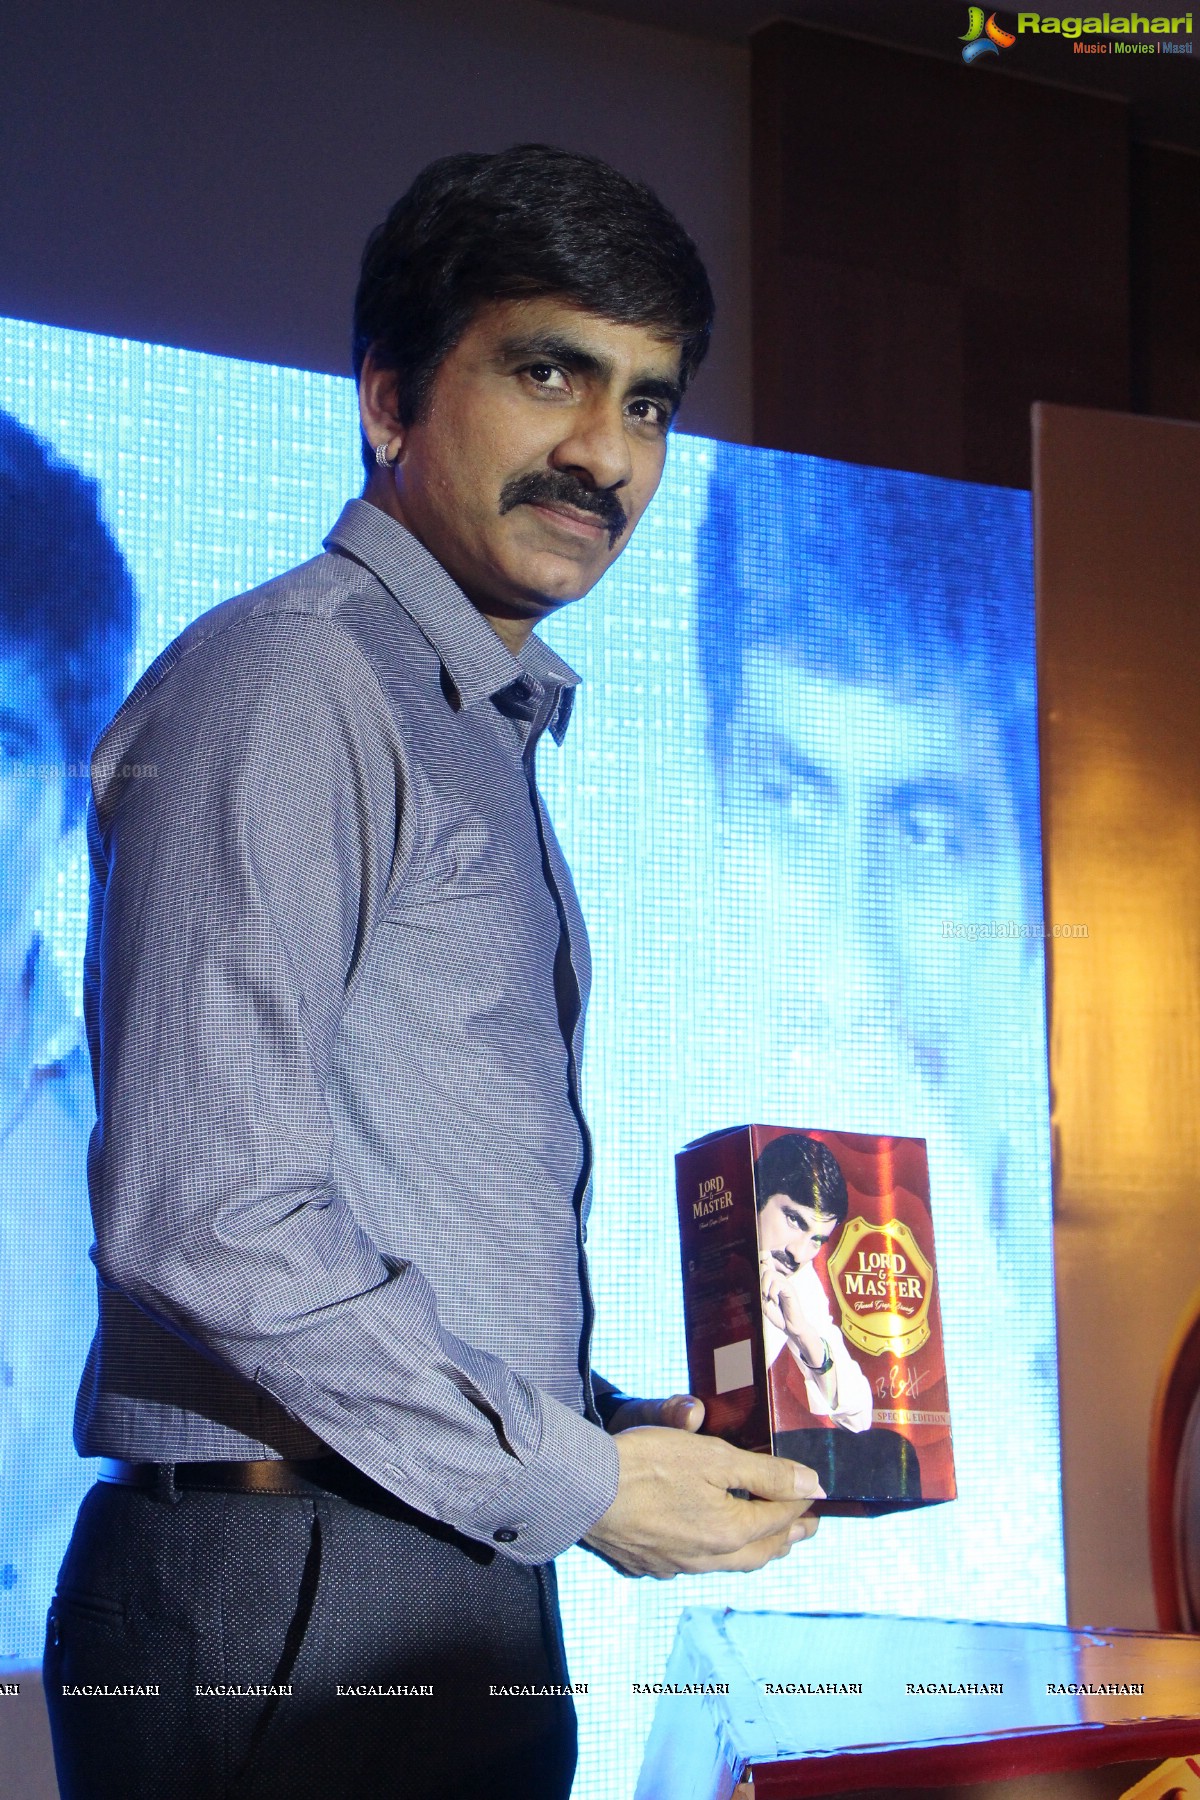 Lord & Master Meet and Greet with the Superstar Ravi Teja